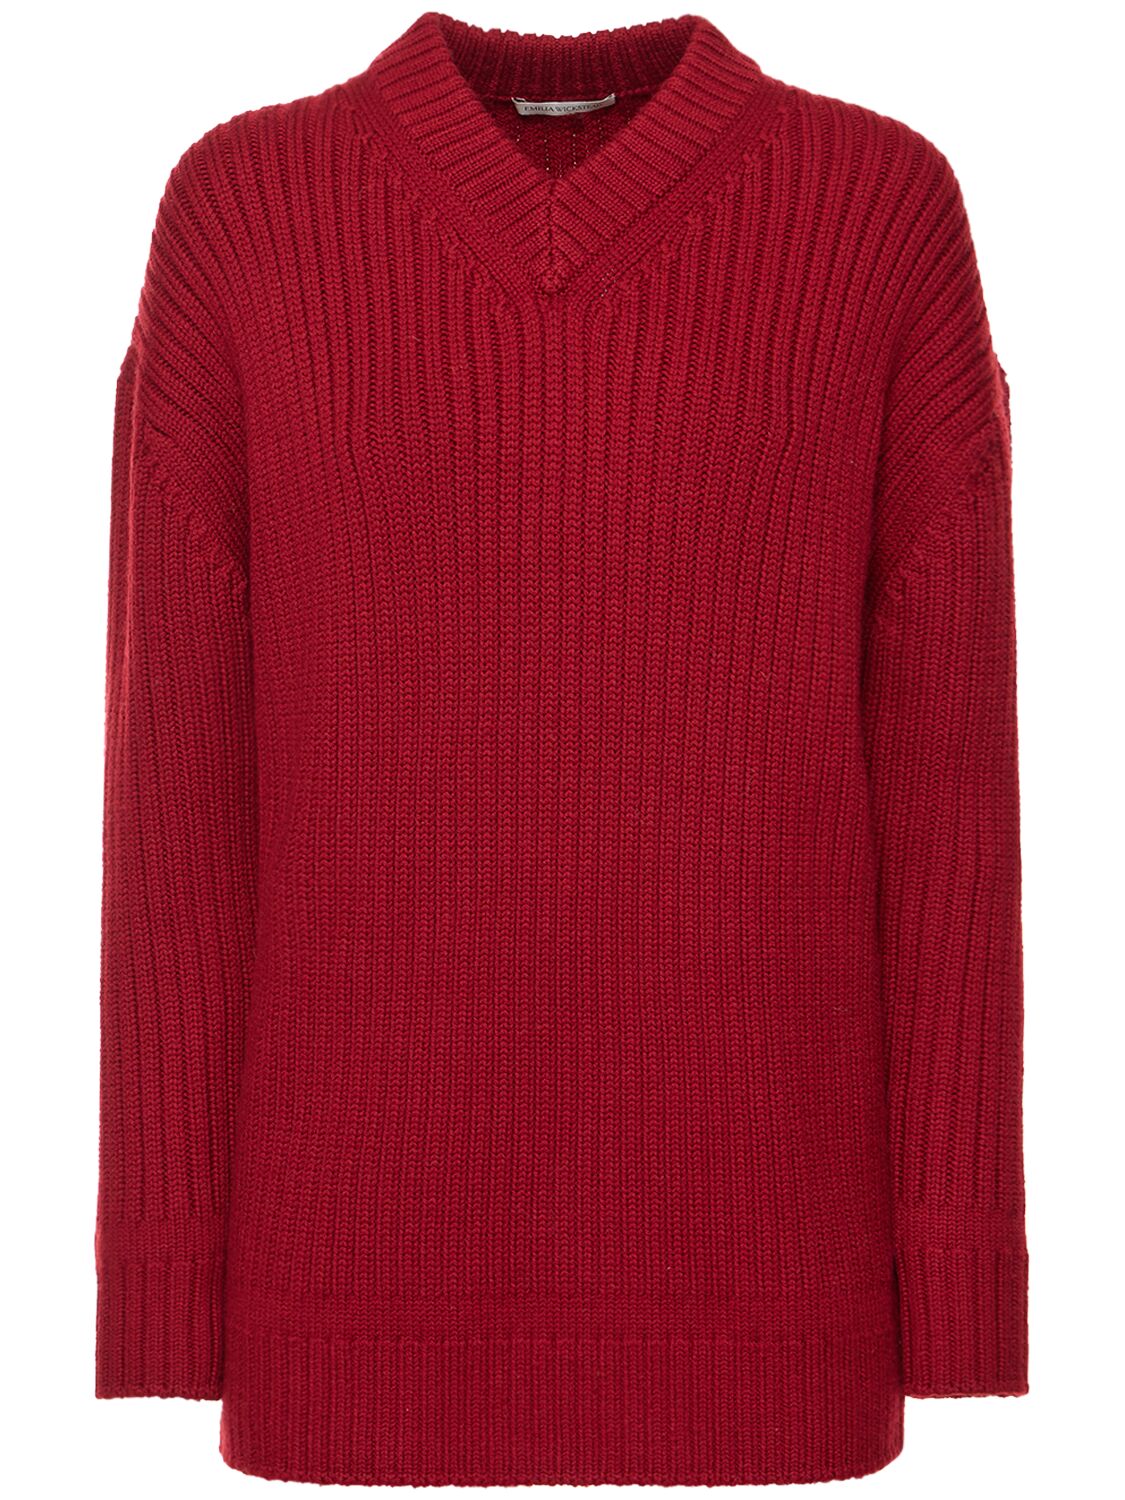 Image of Wool Knit V Neck Sweater